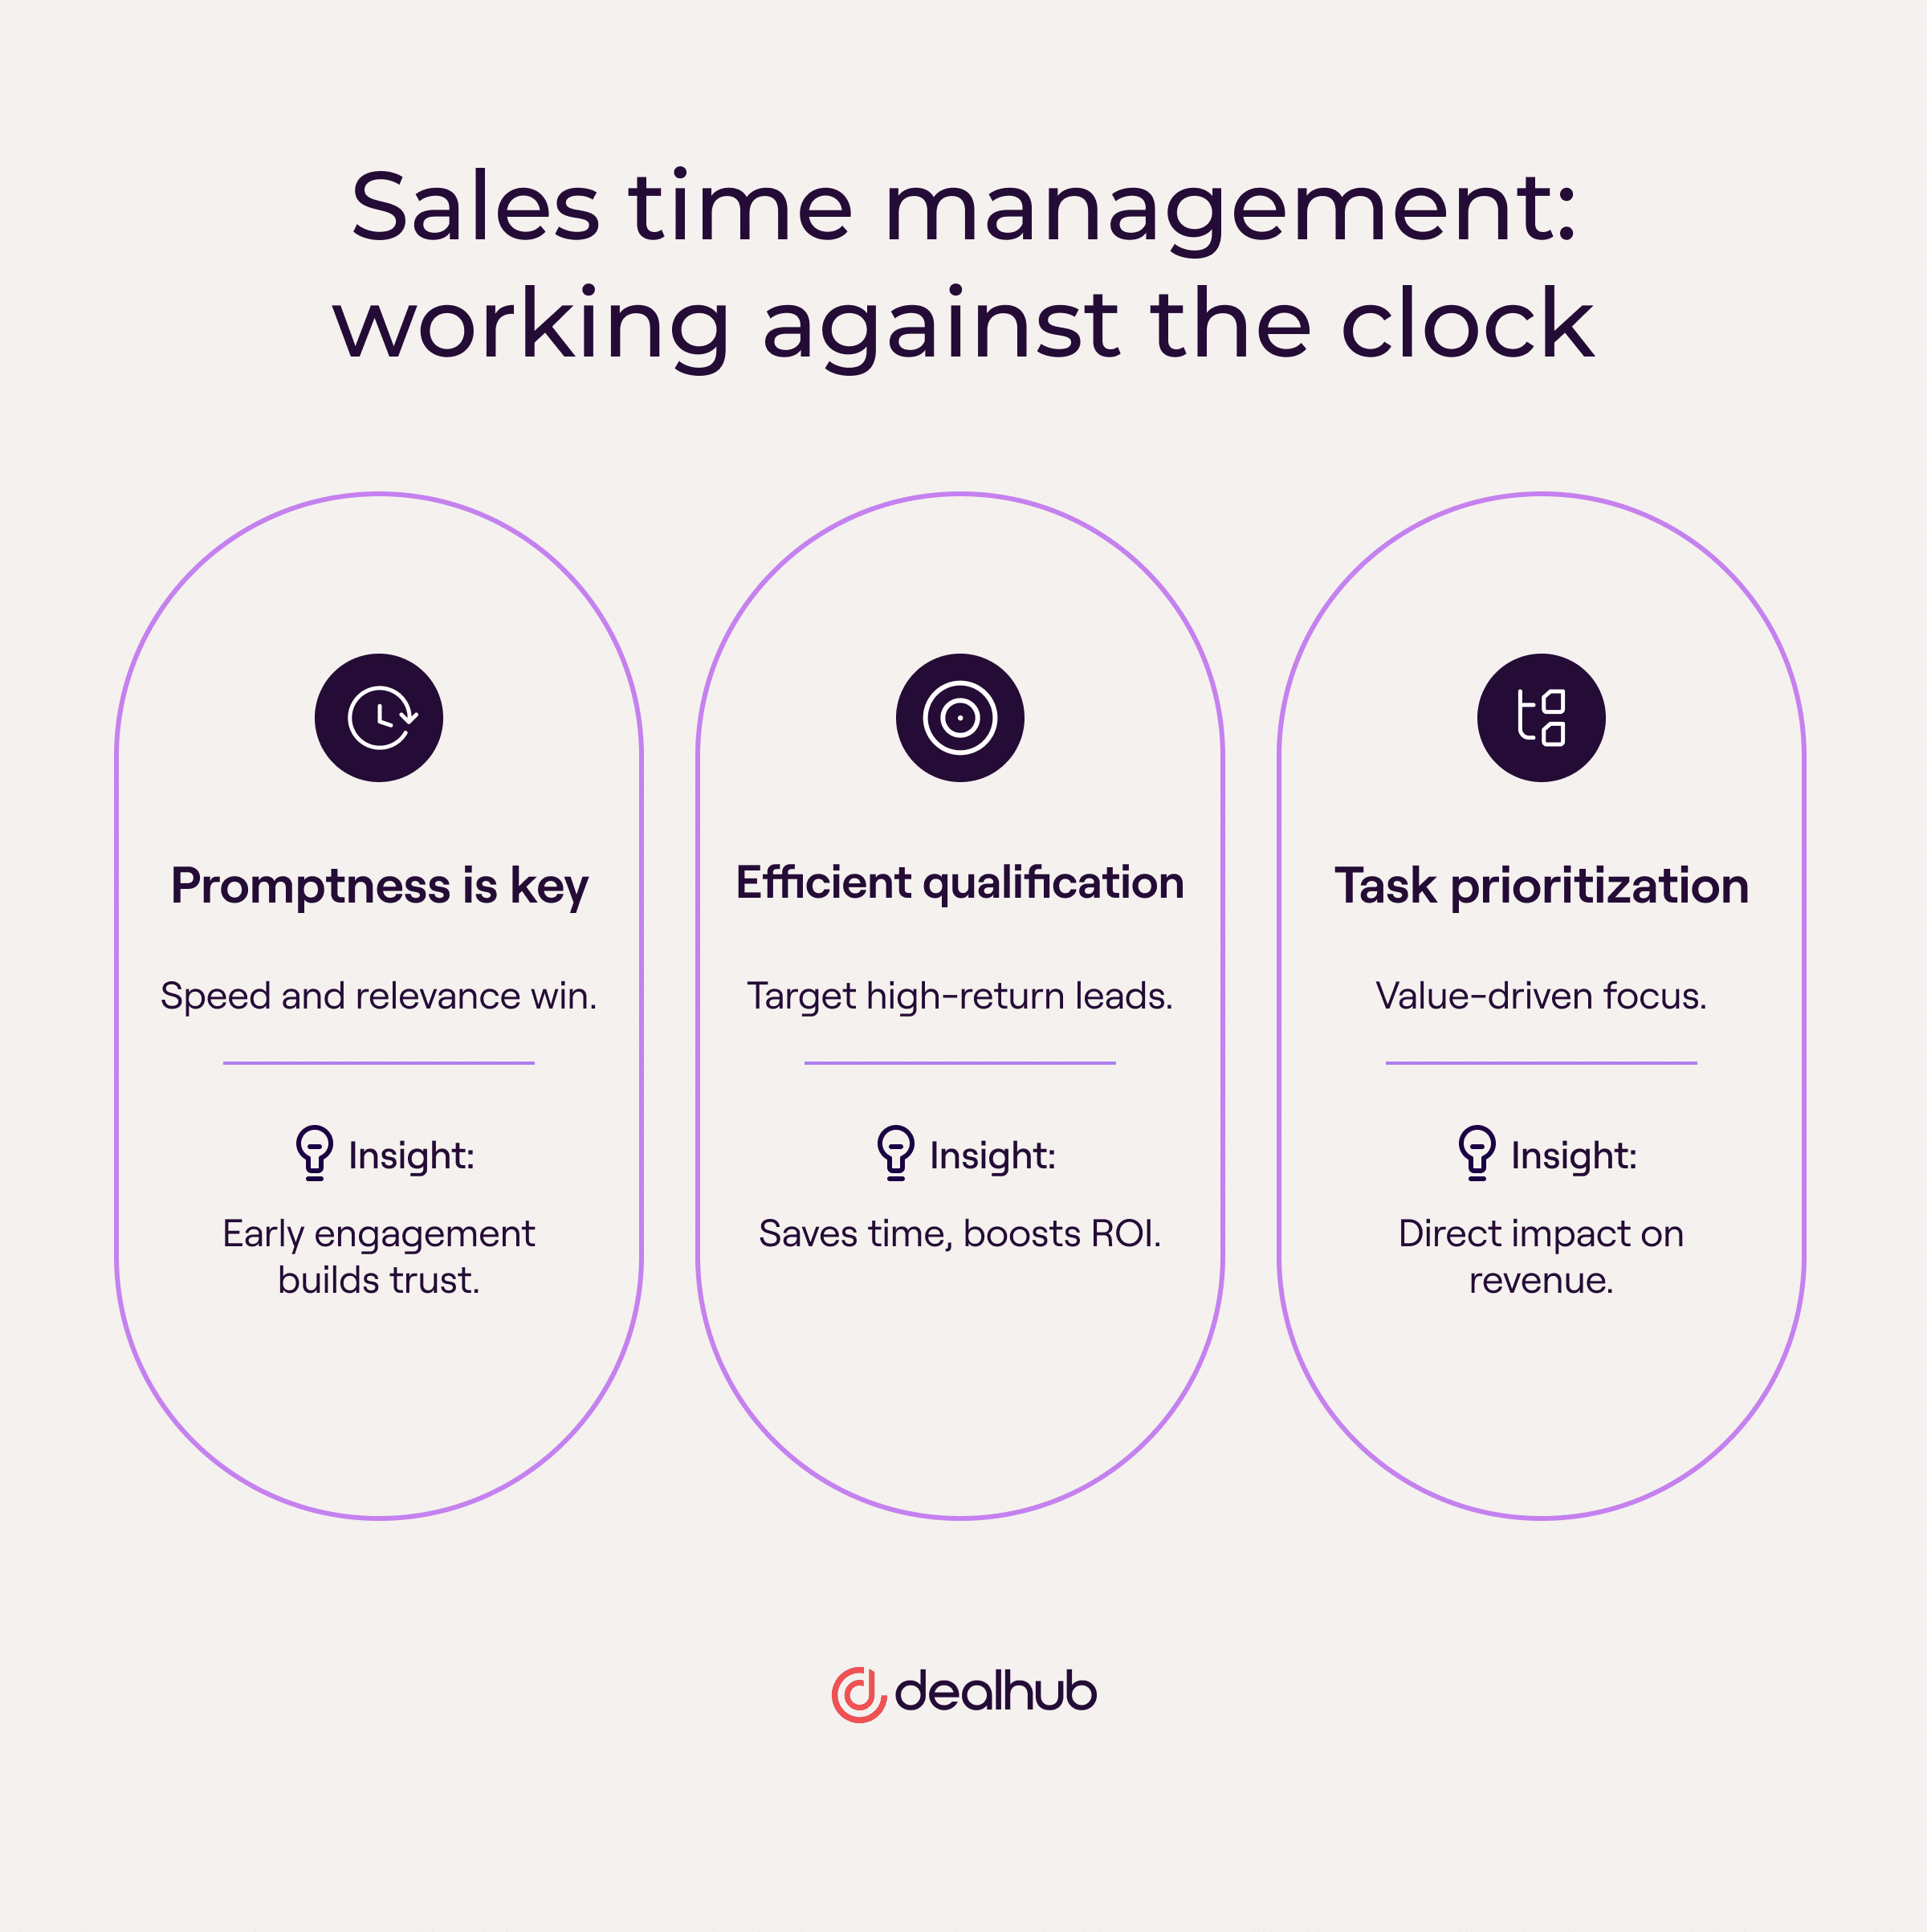 Sales time management: working against the clock